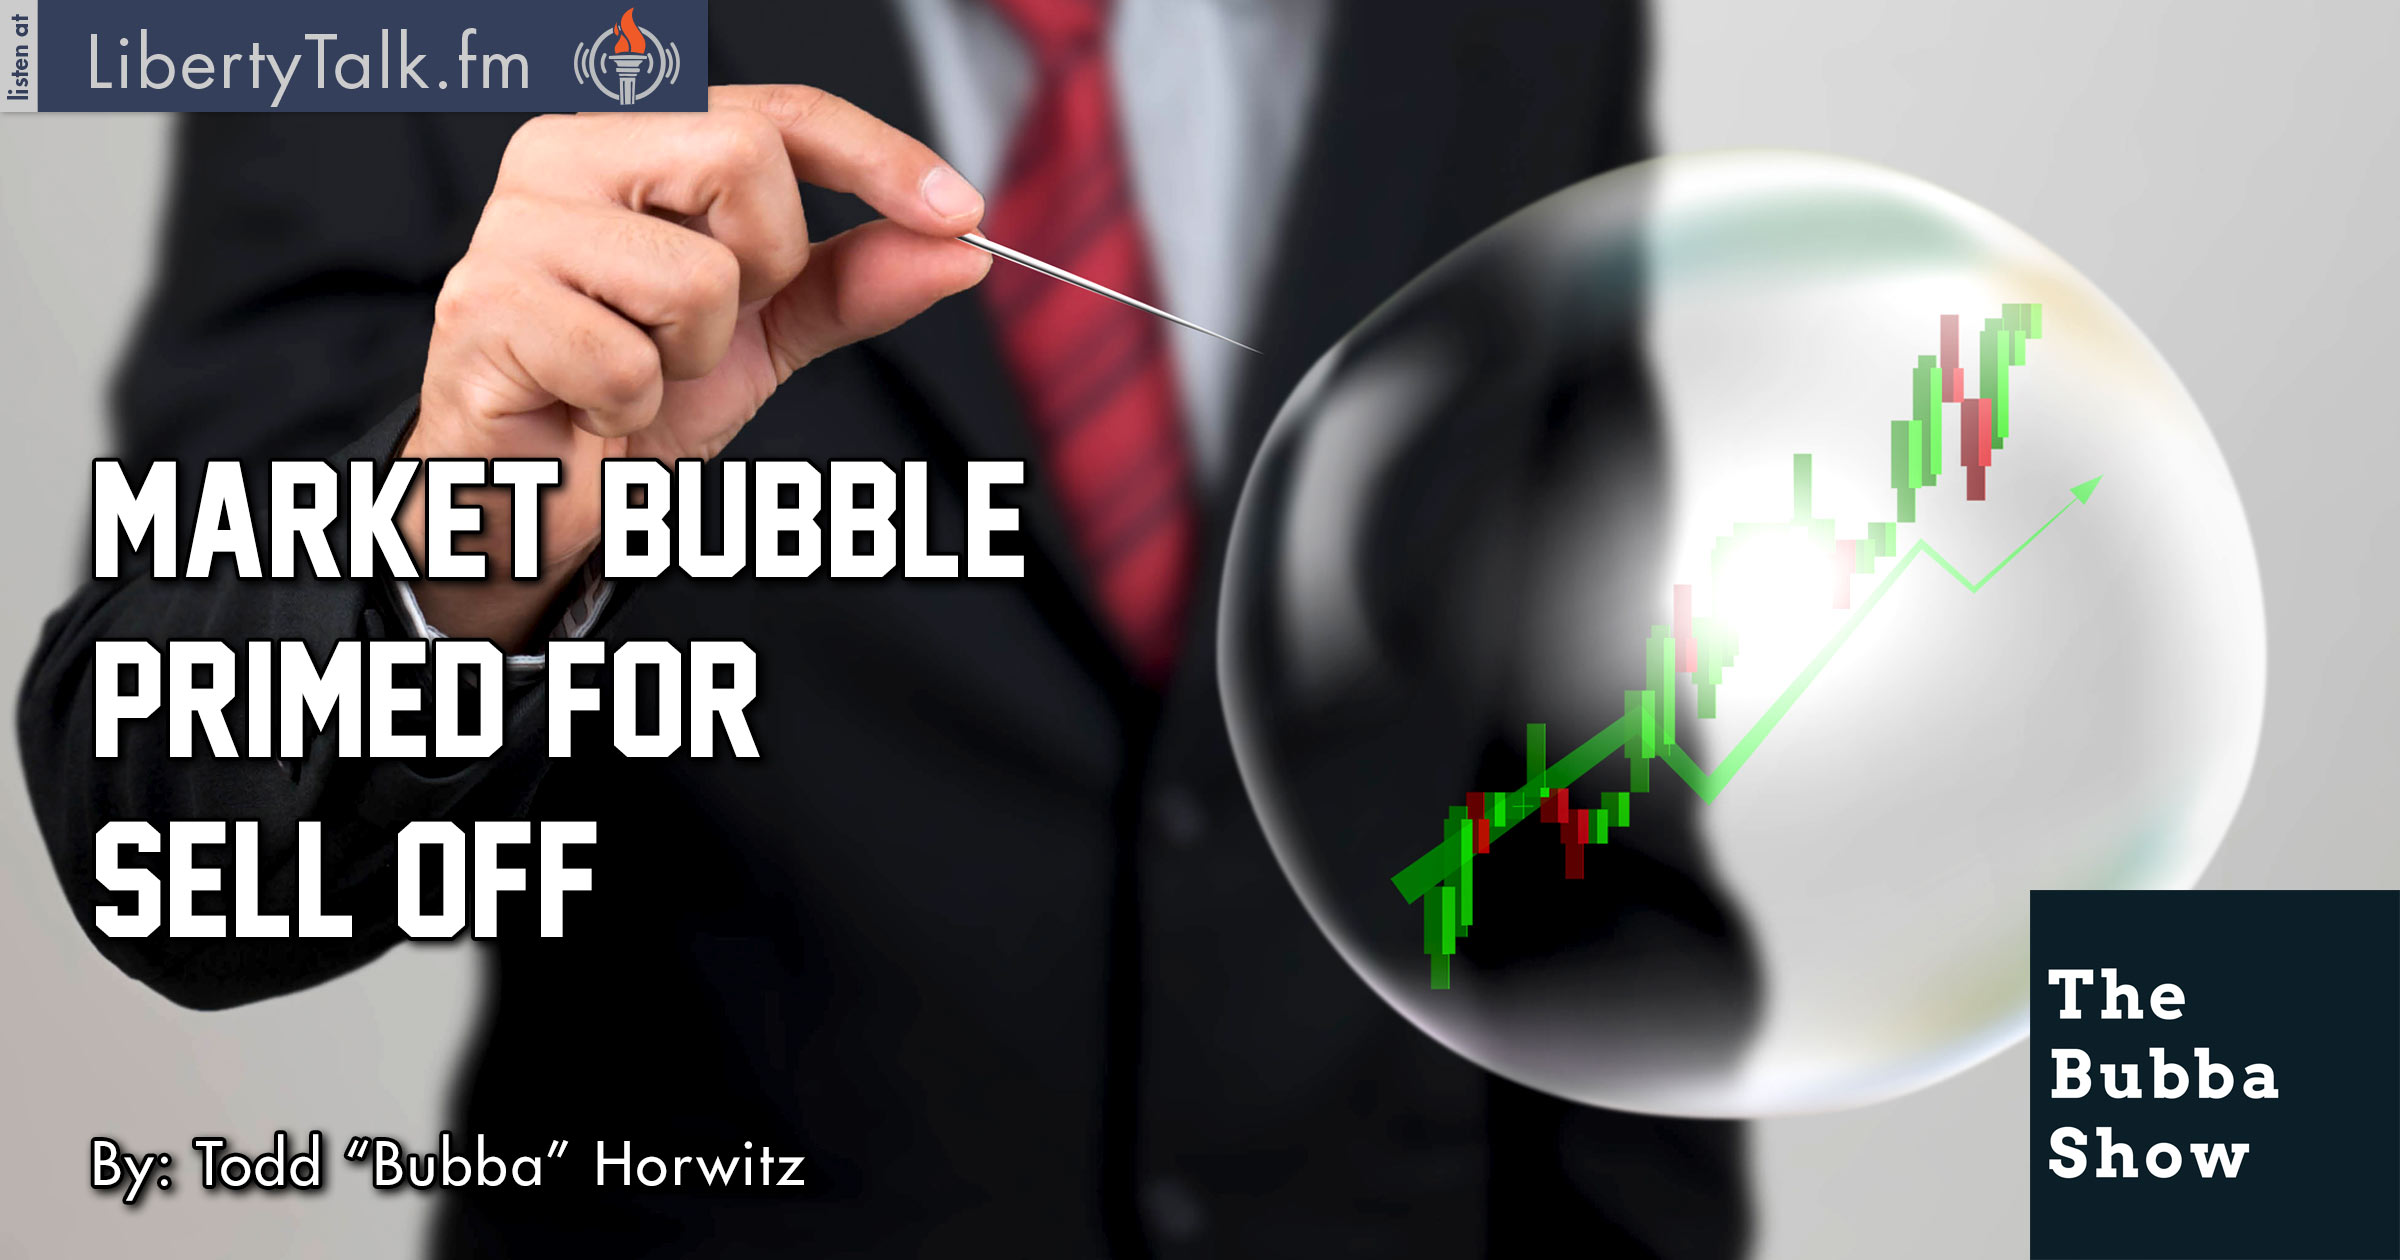 Market Bubble Primed for Sell Off - The Bubba Show